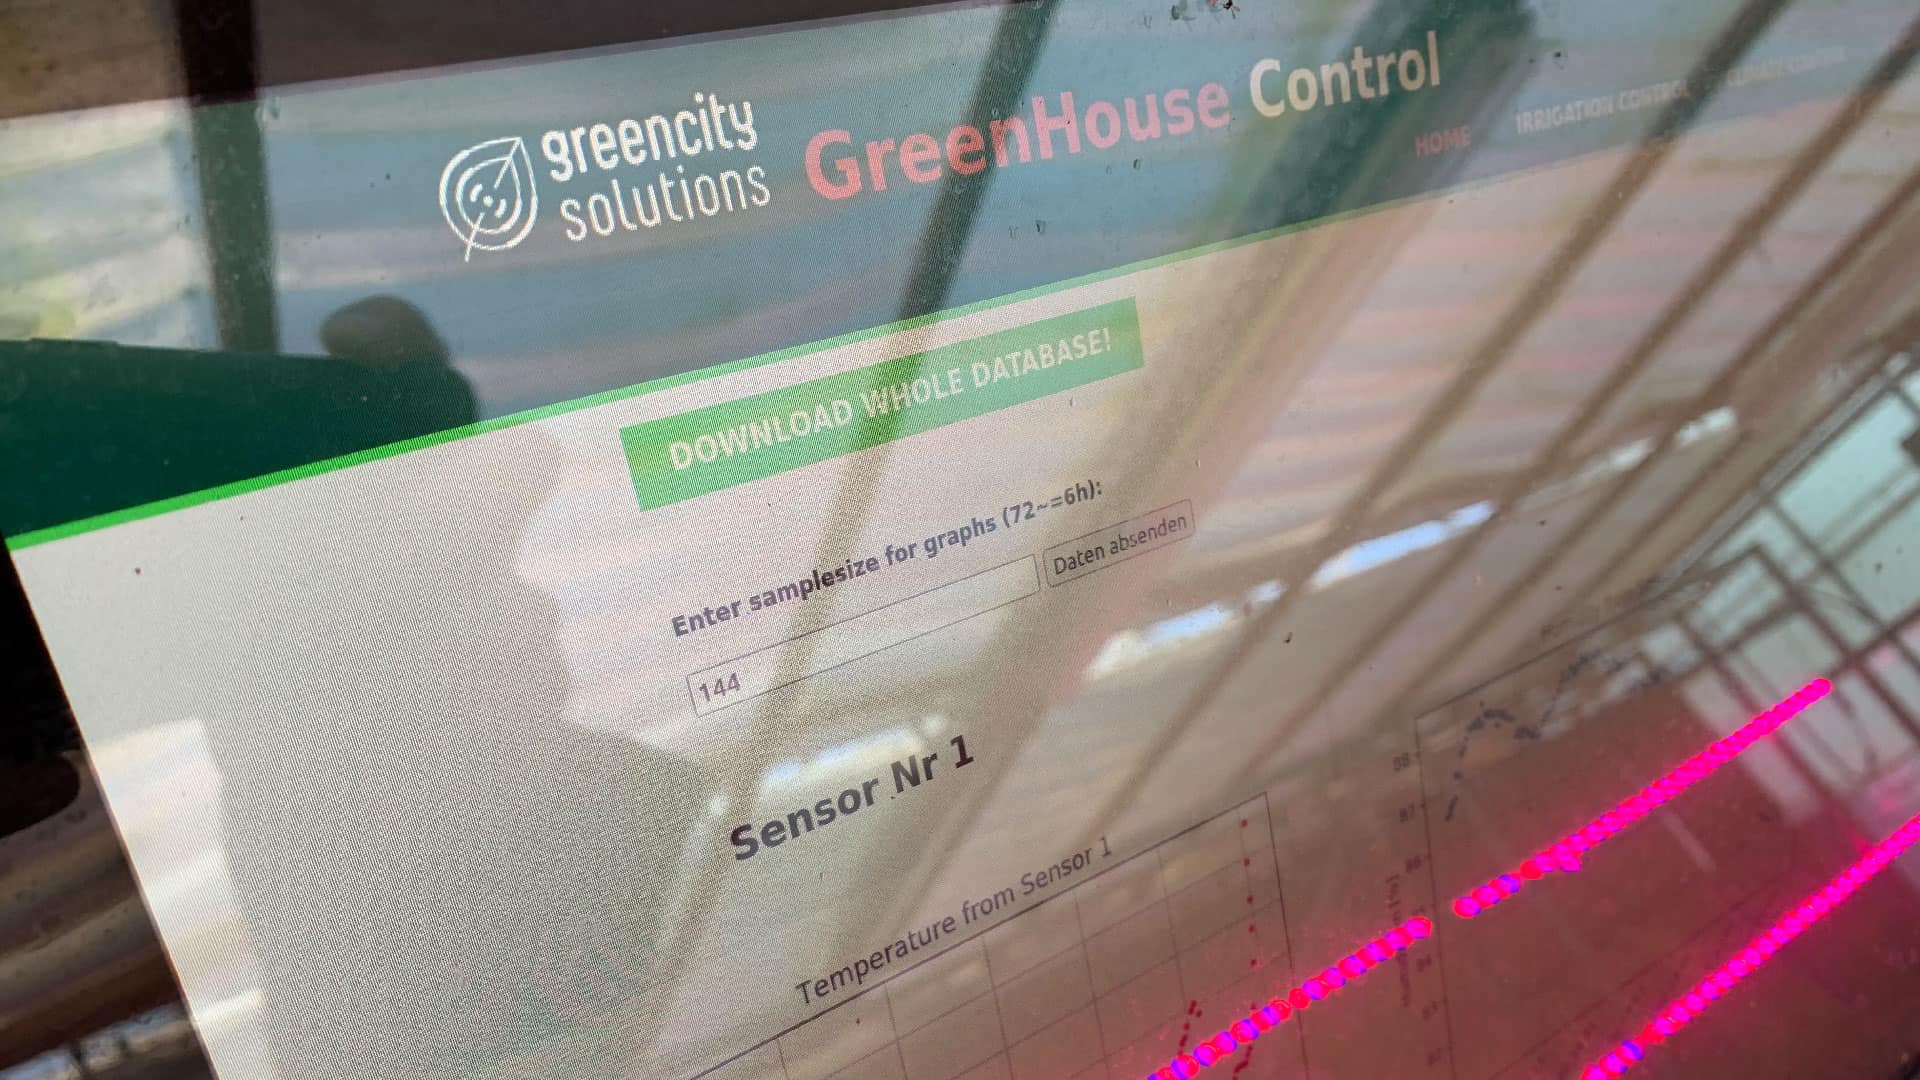 This shows our greenhouse control monitor in the moss farm